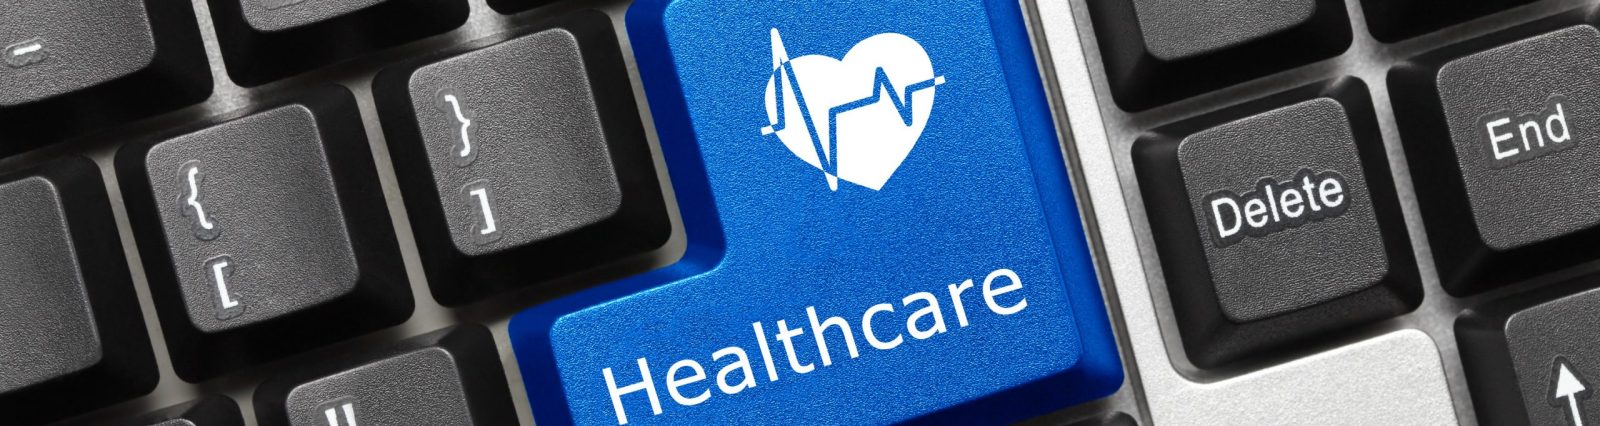 3 Tips for Healthcare Marketing In 2017